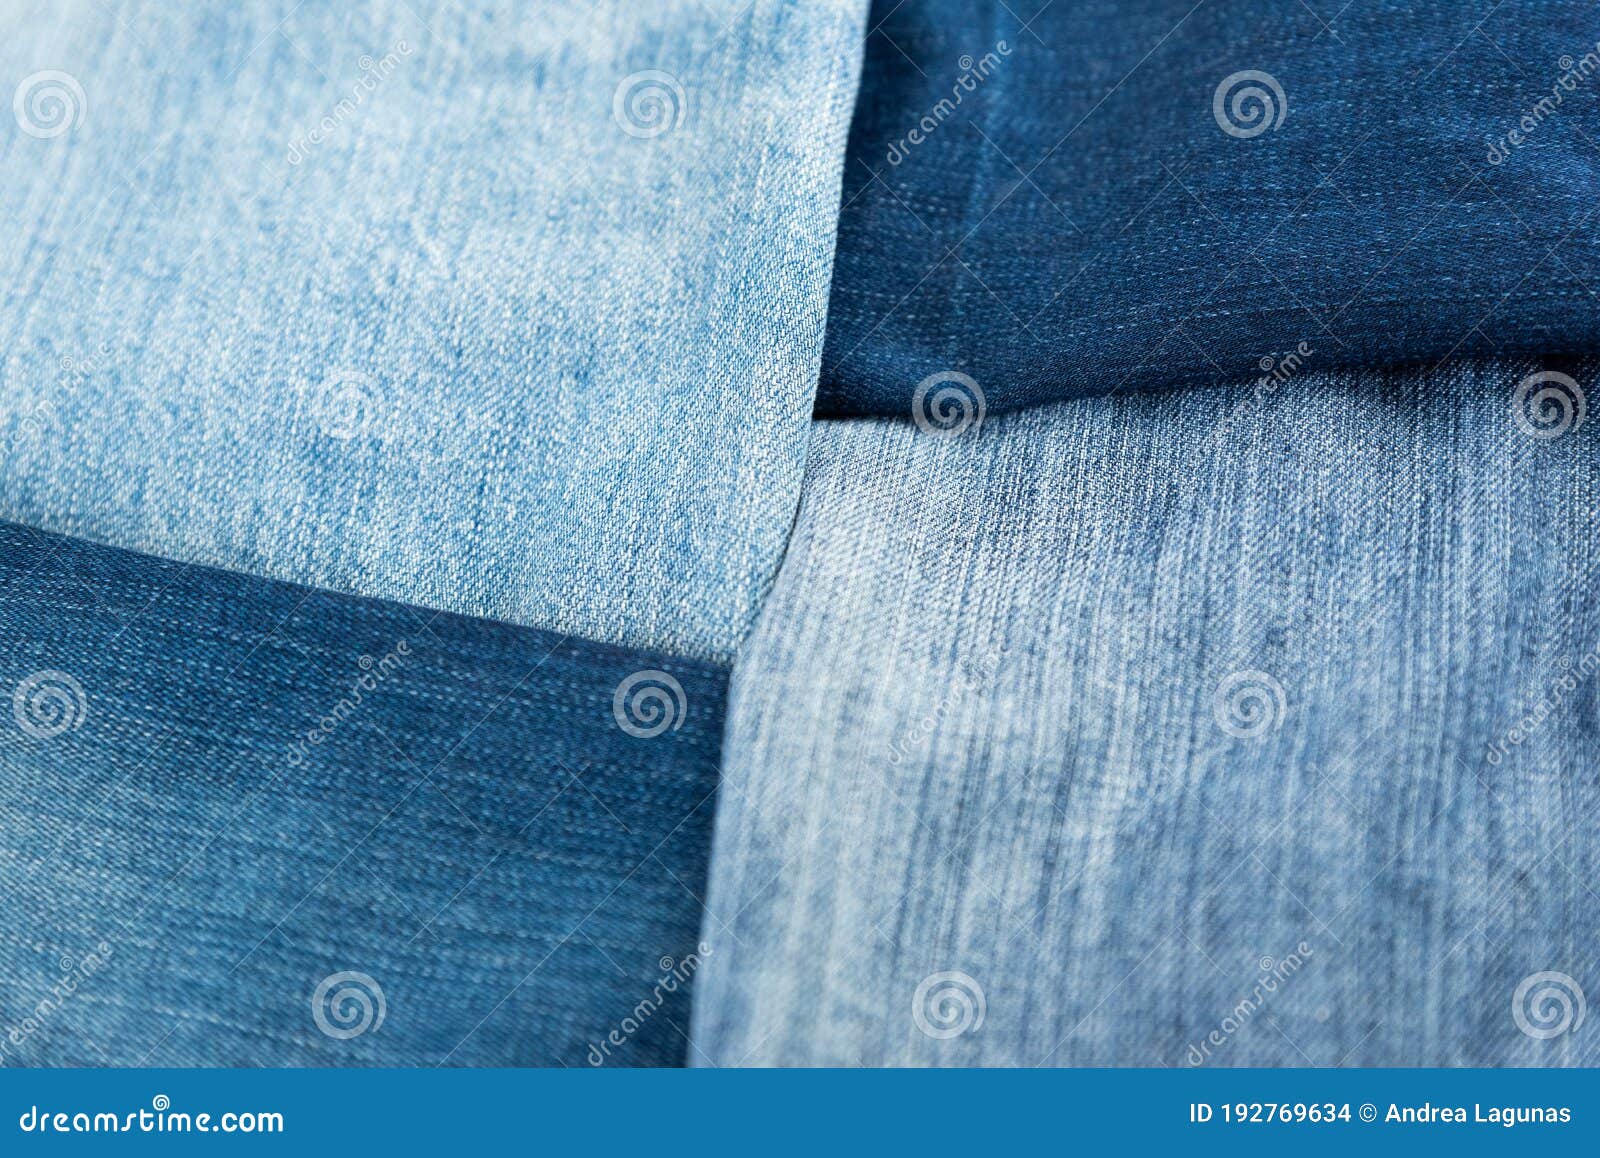 Blue Jeans of Different Shades Stock Image - Image of fabric, denim:  121527073